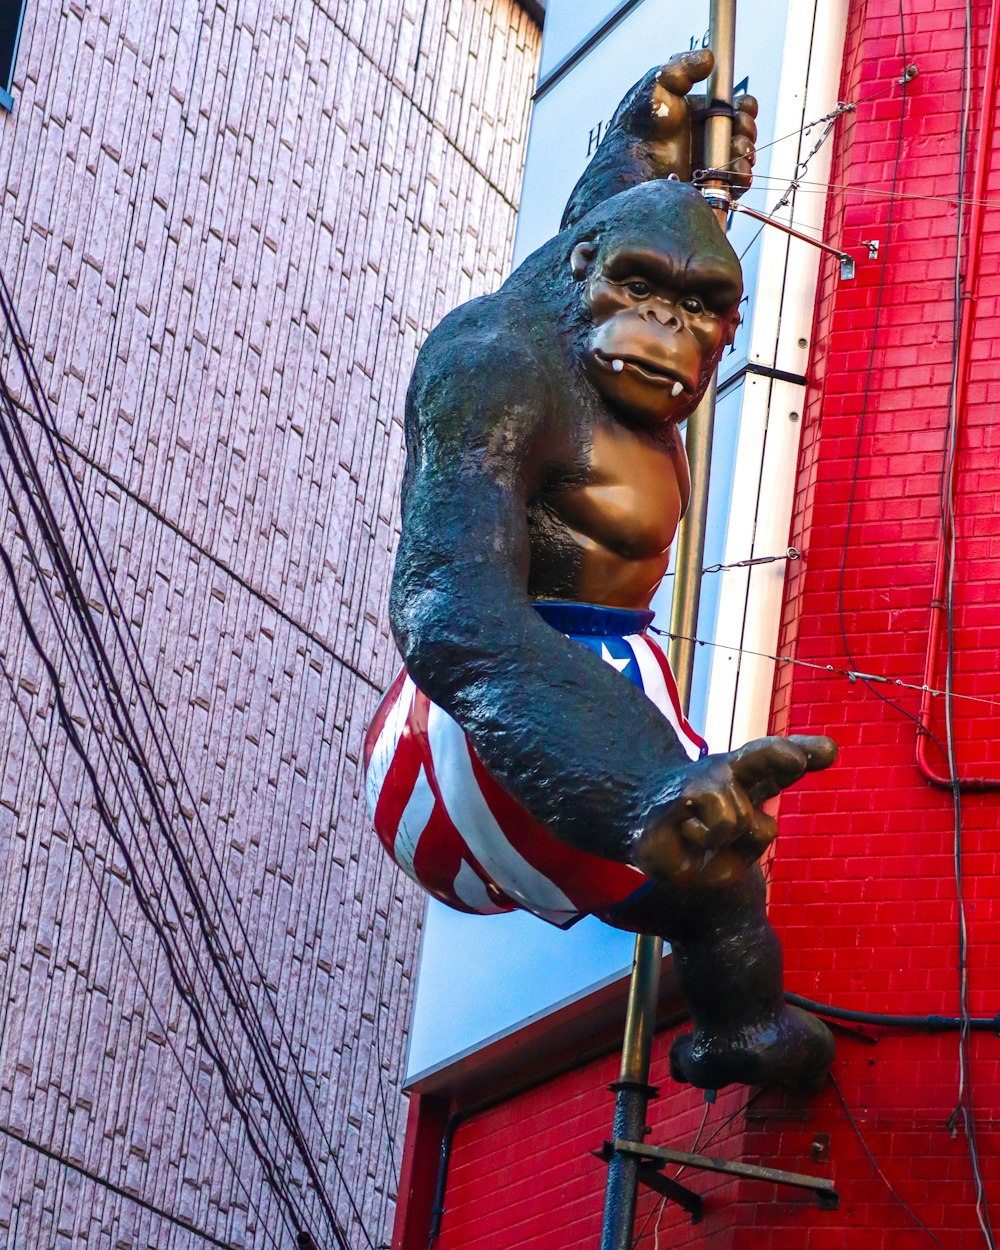 a statue of a gorilla hanging from a building